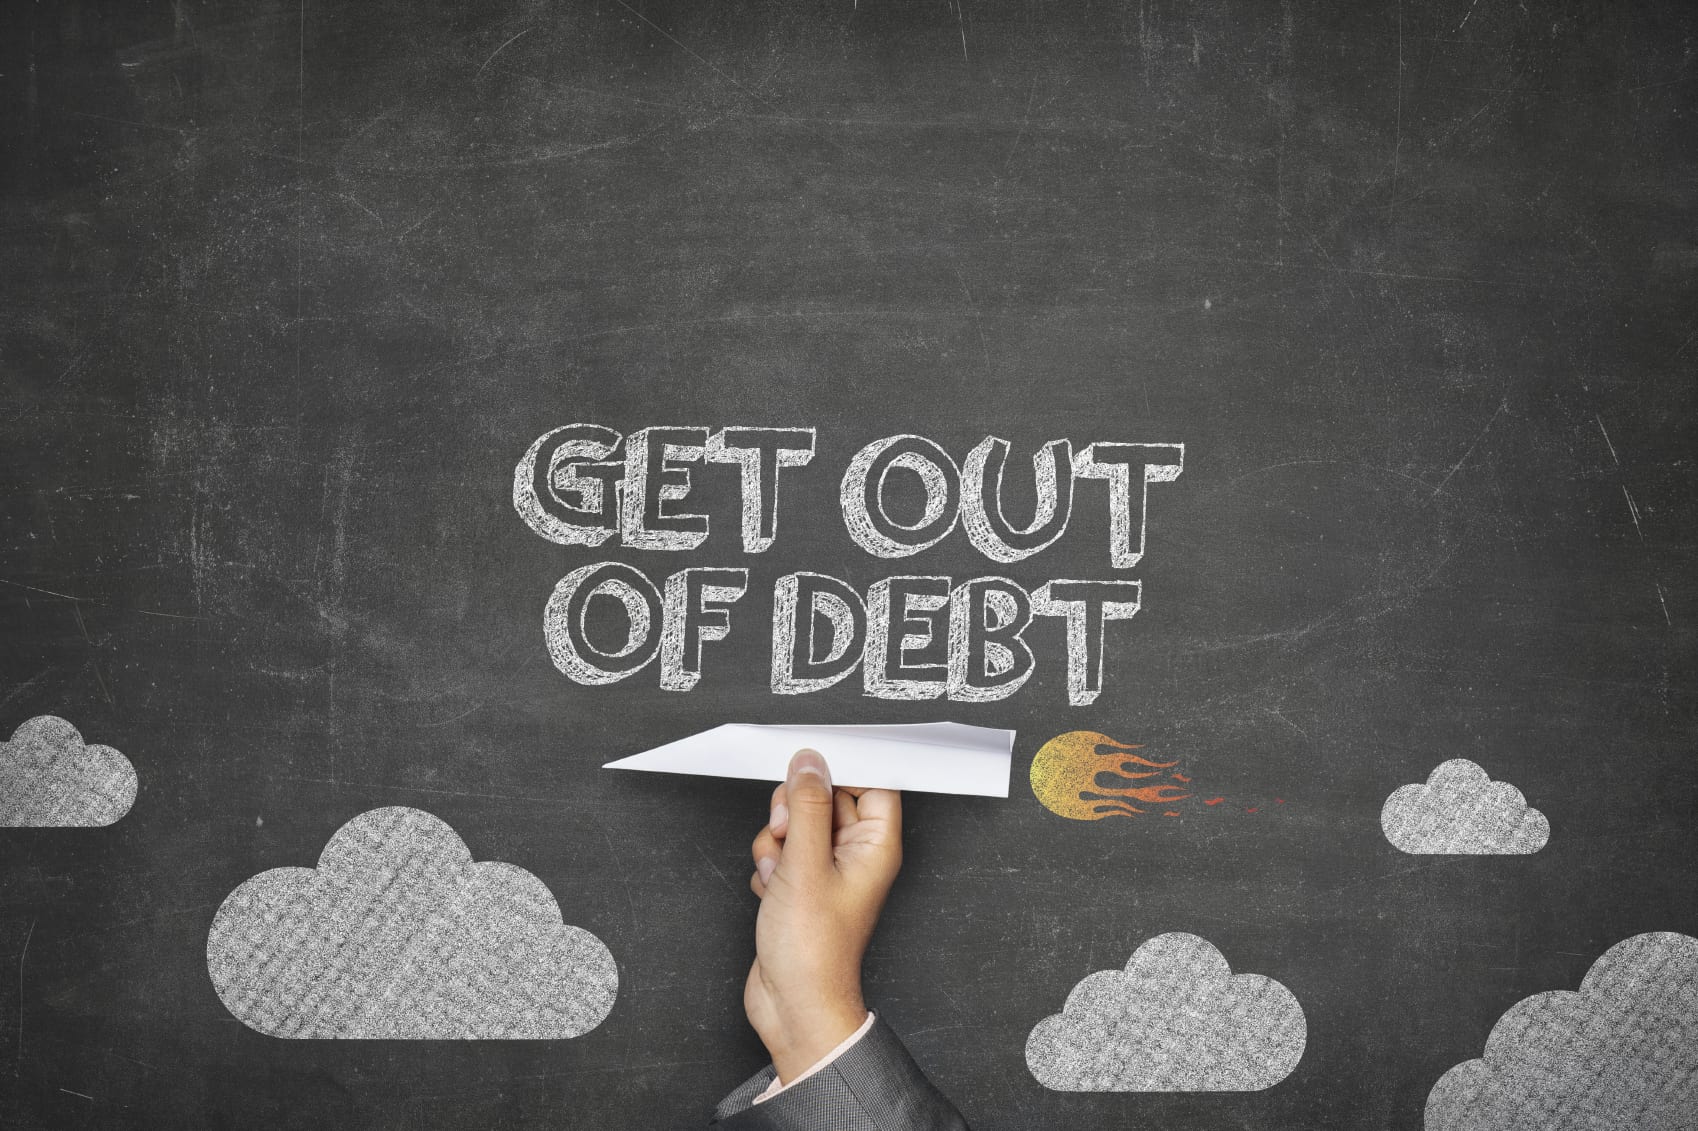 How to Run a Debt-Free Business